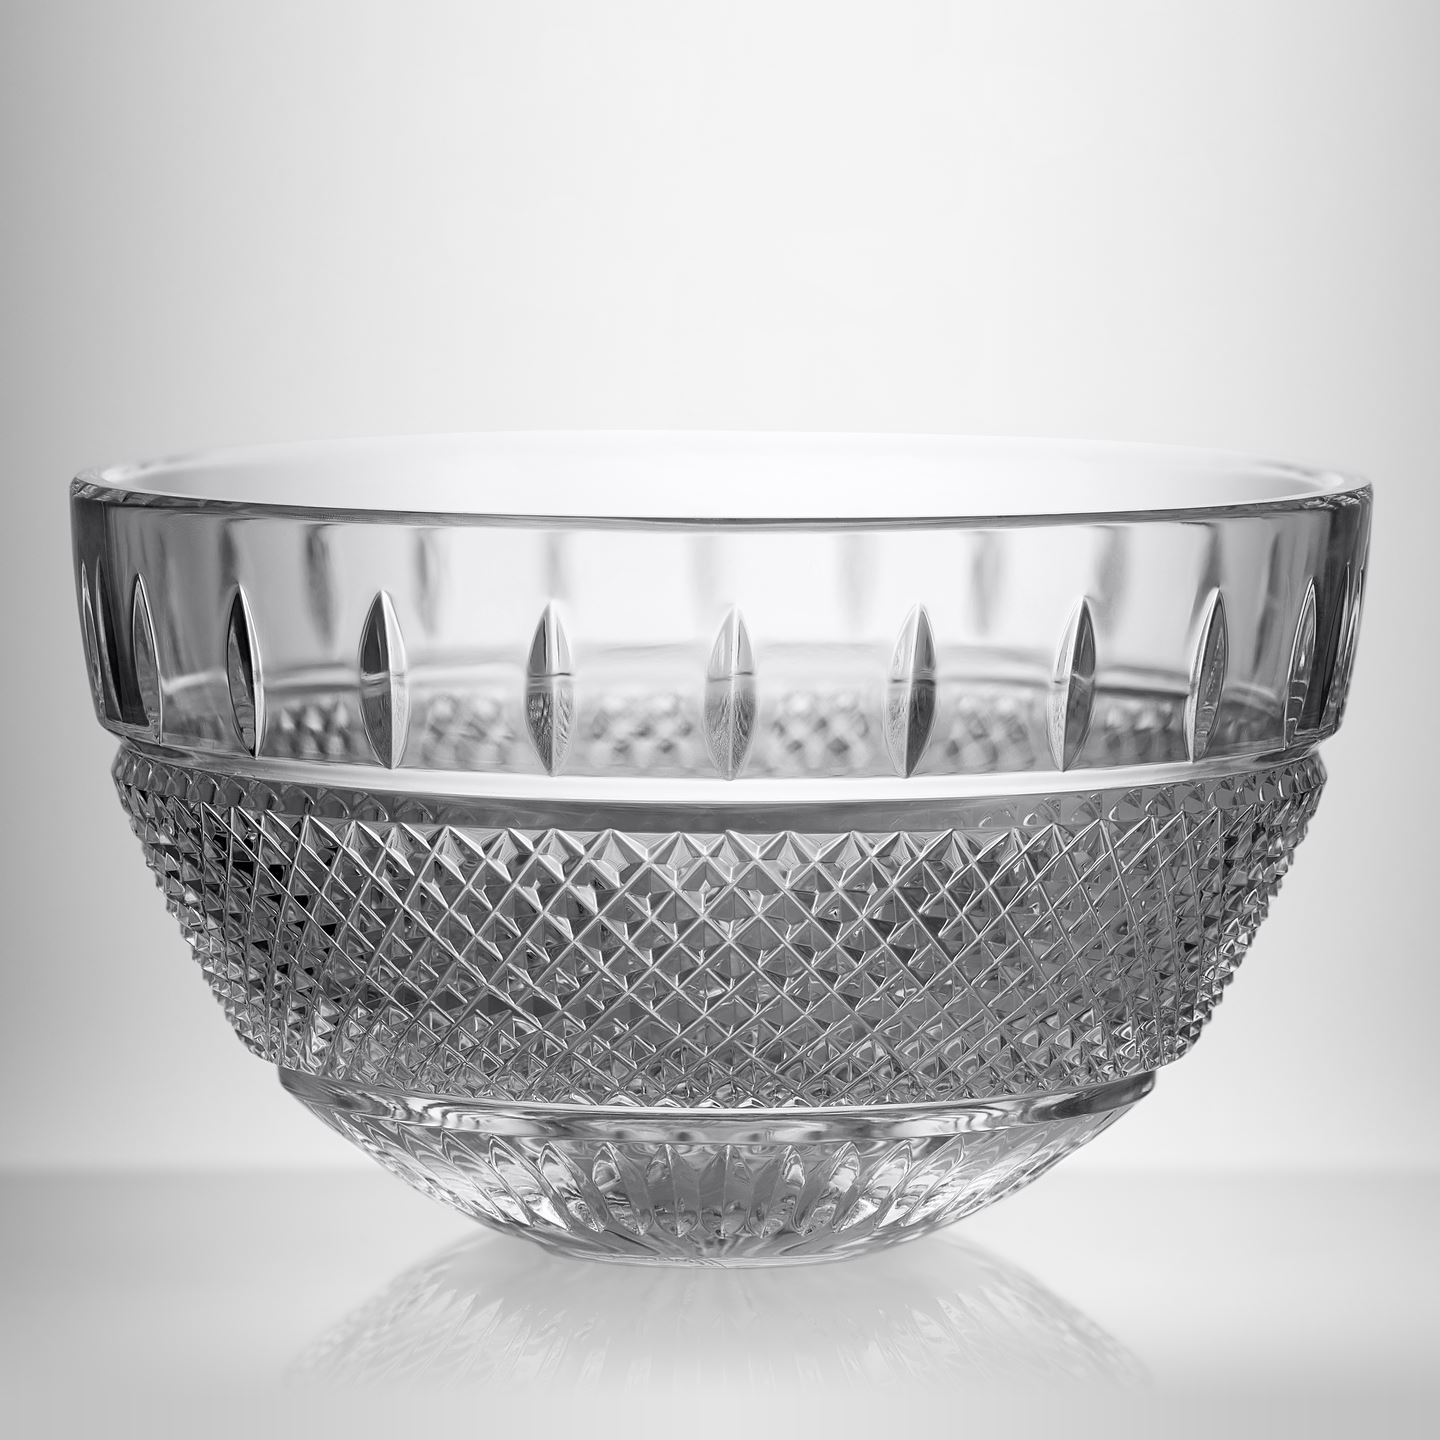 Crystal Irish Lace Glassware - Bowls & Vases - Waterford®